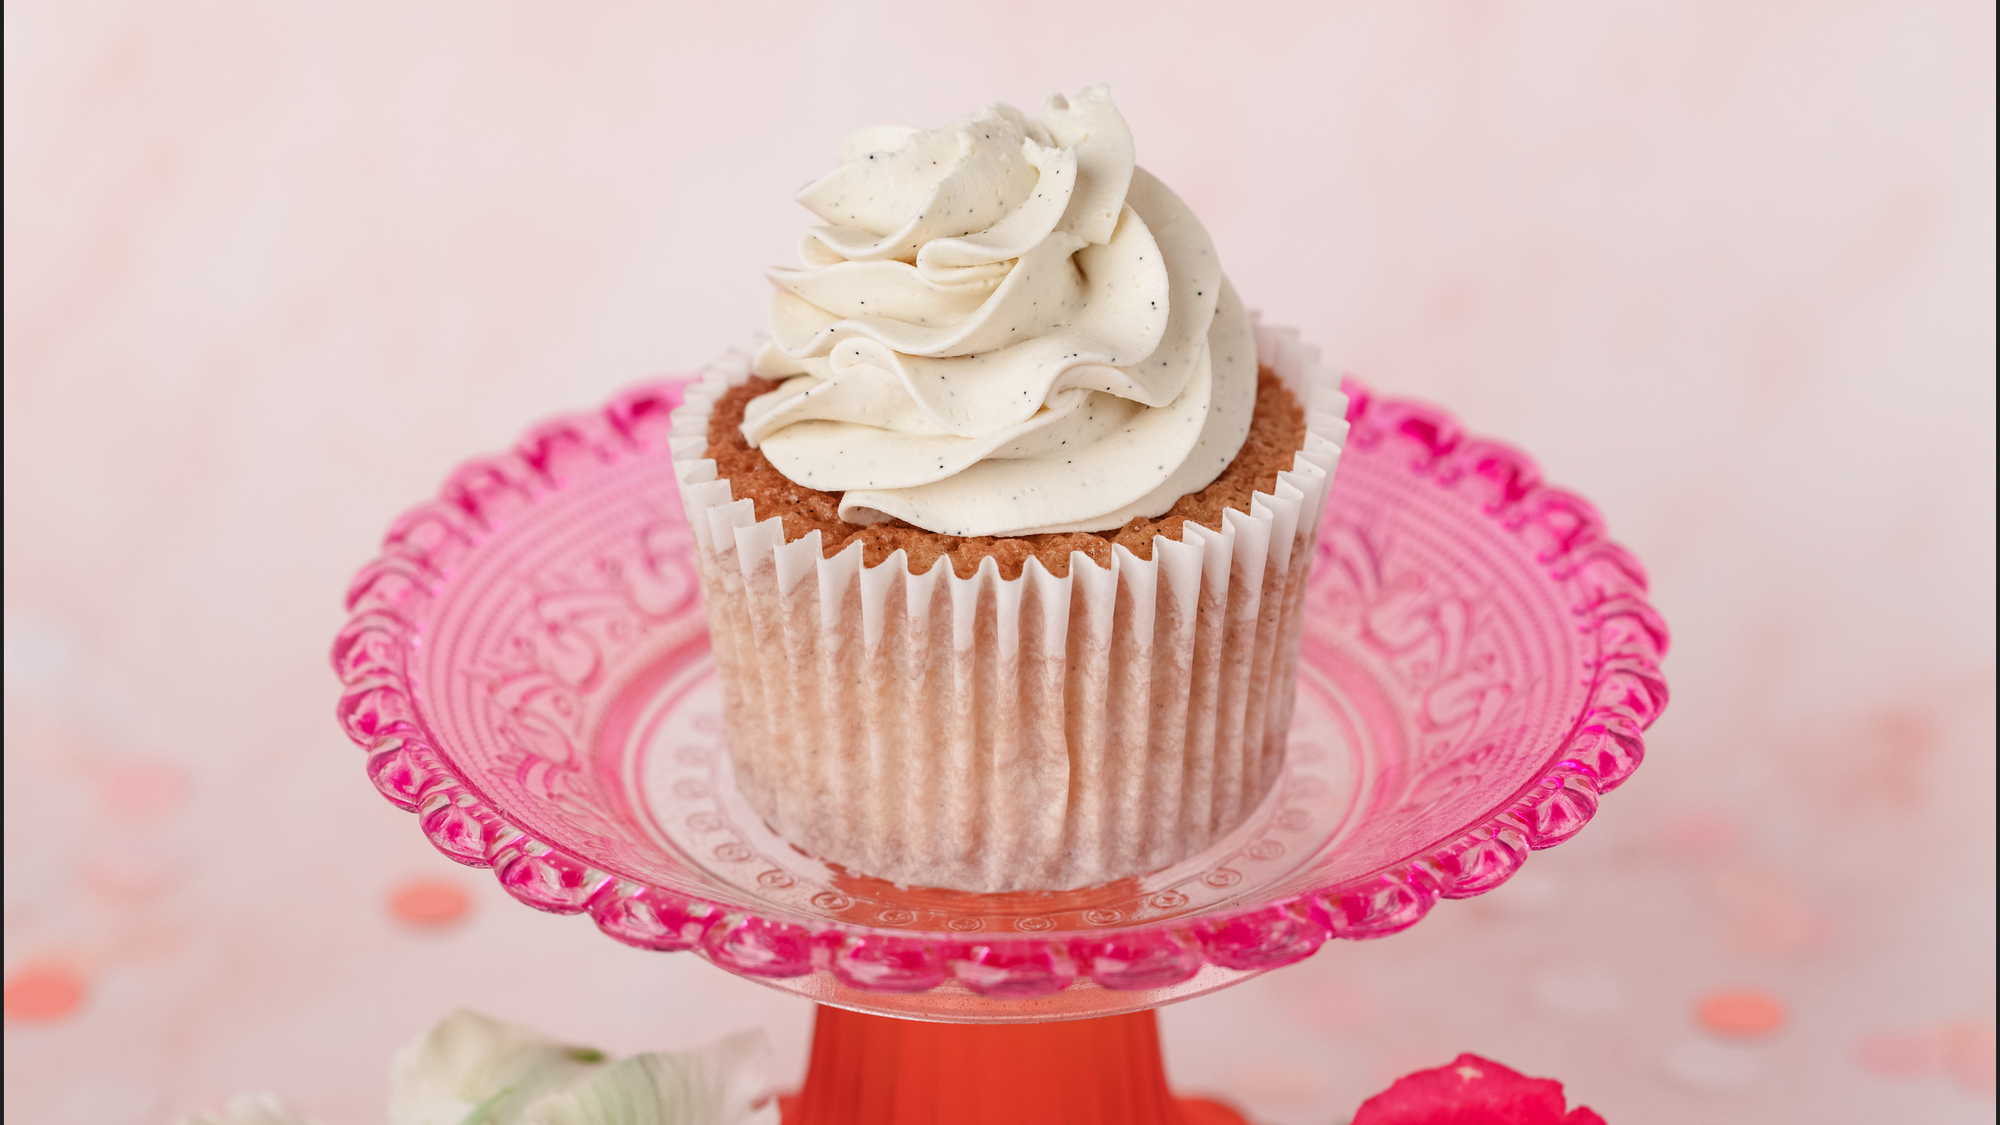 Carrot Cake Cupcakes with Cream Cheese Buttercream